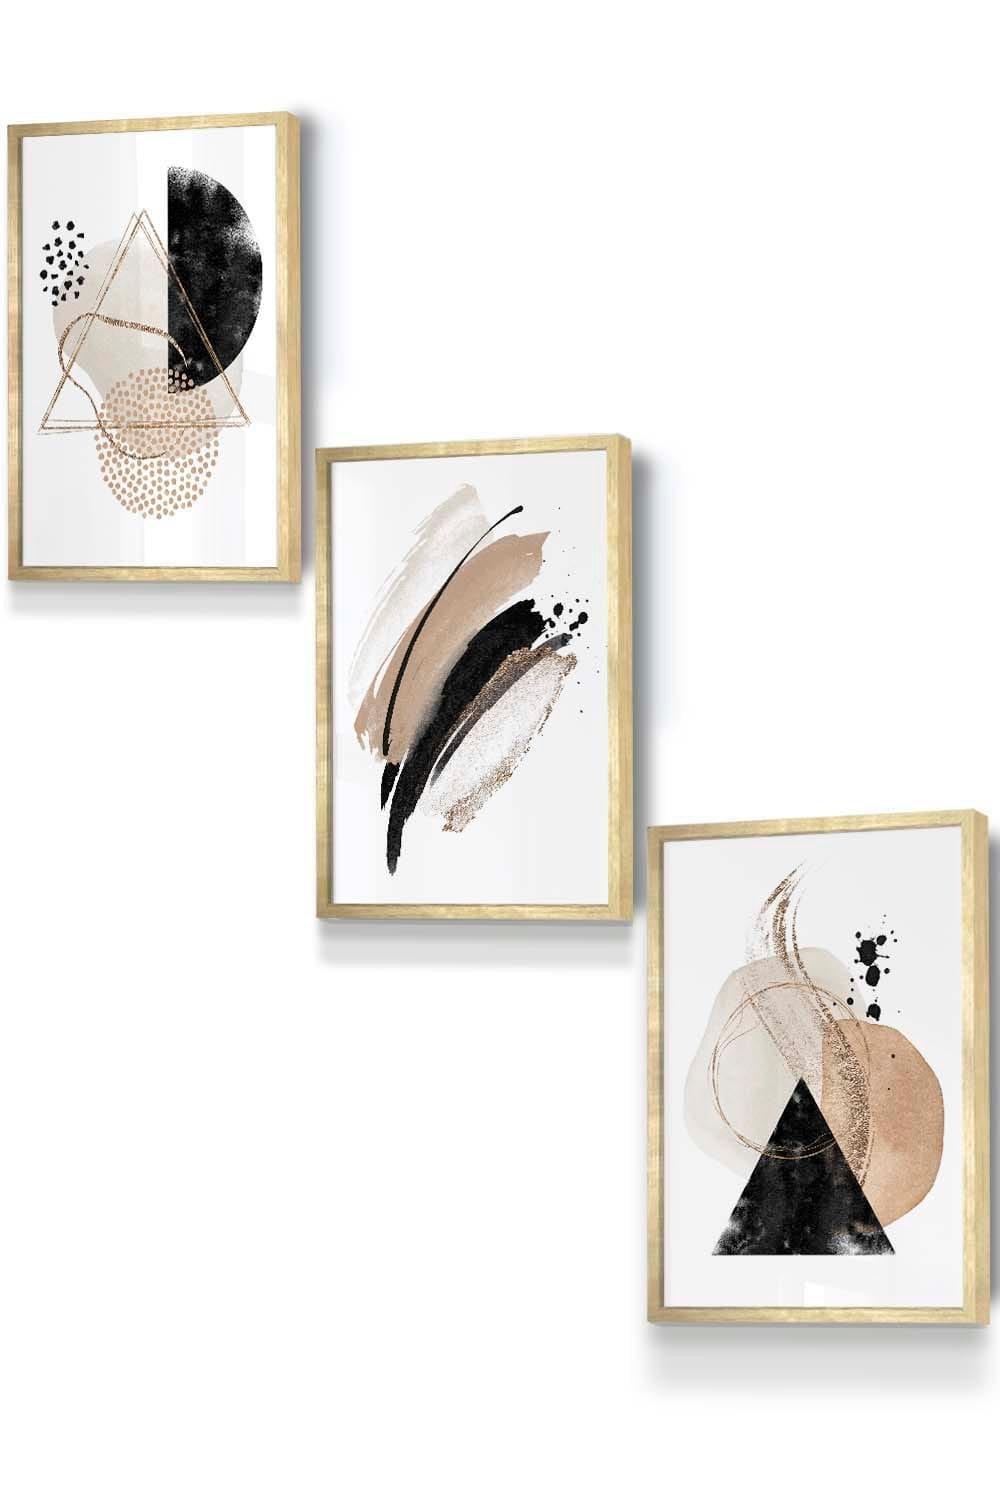 Abstract Black Beige Watercolour Shapes Framed Wall Art - Small